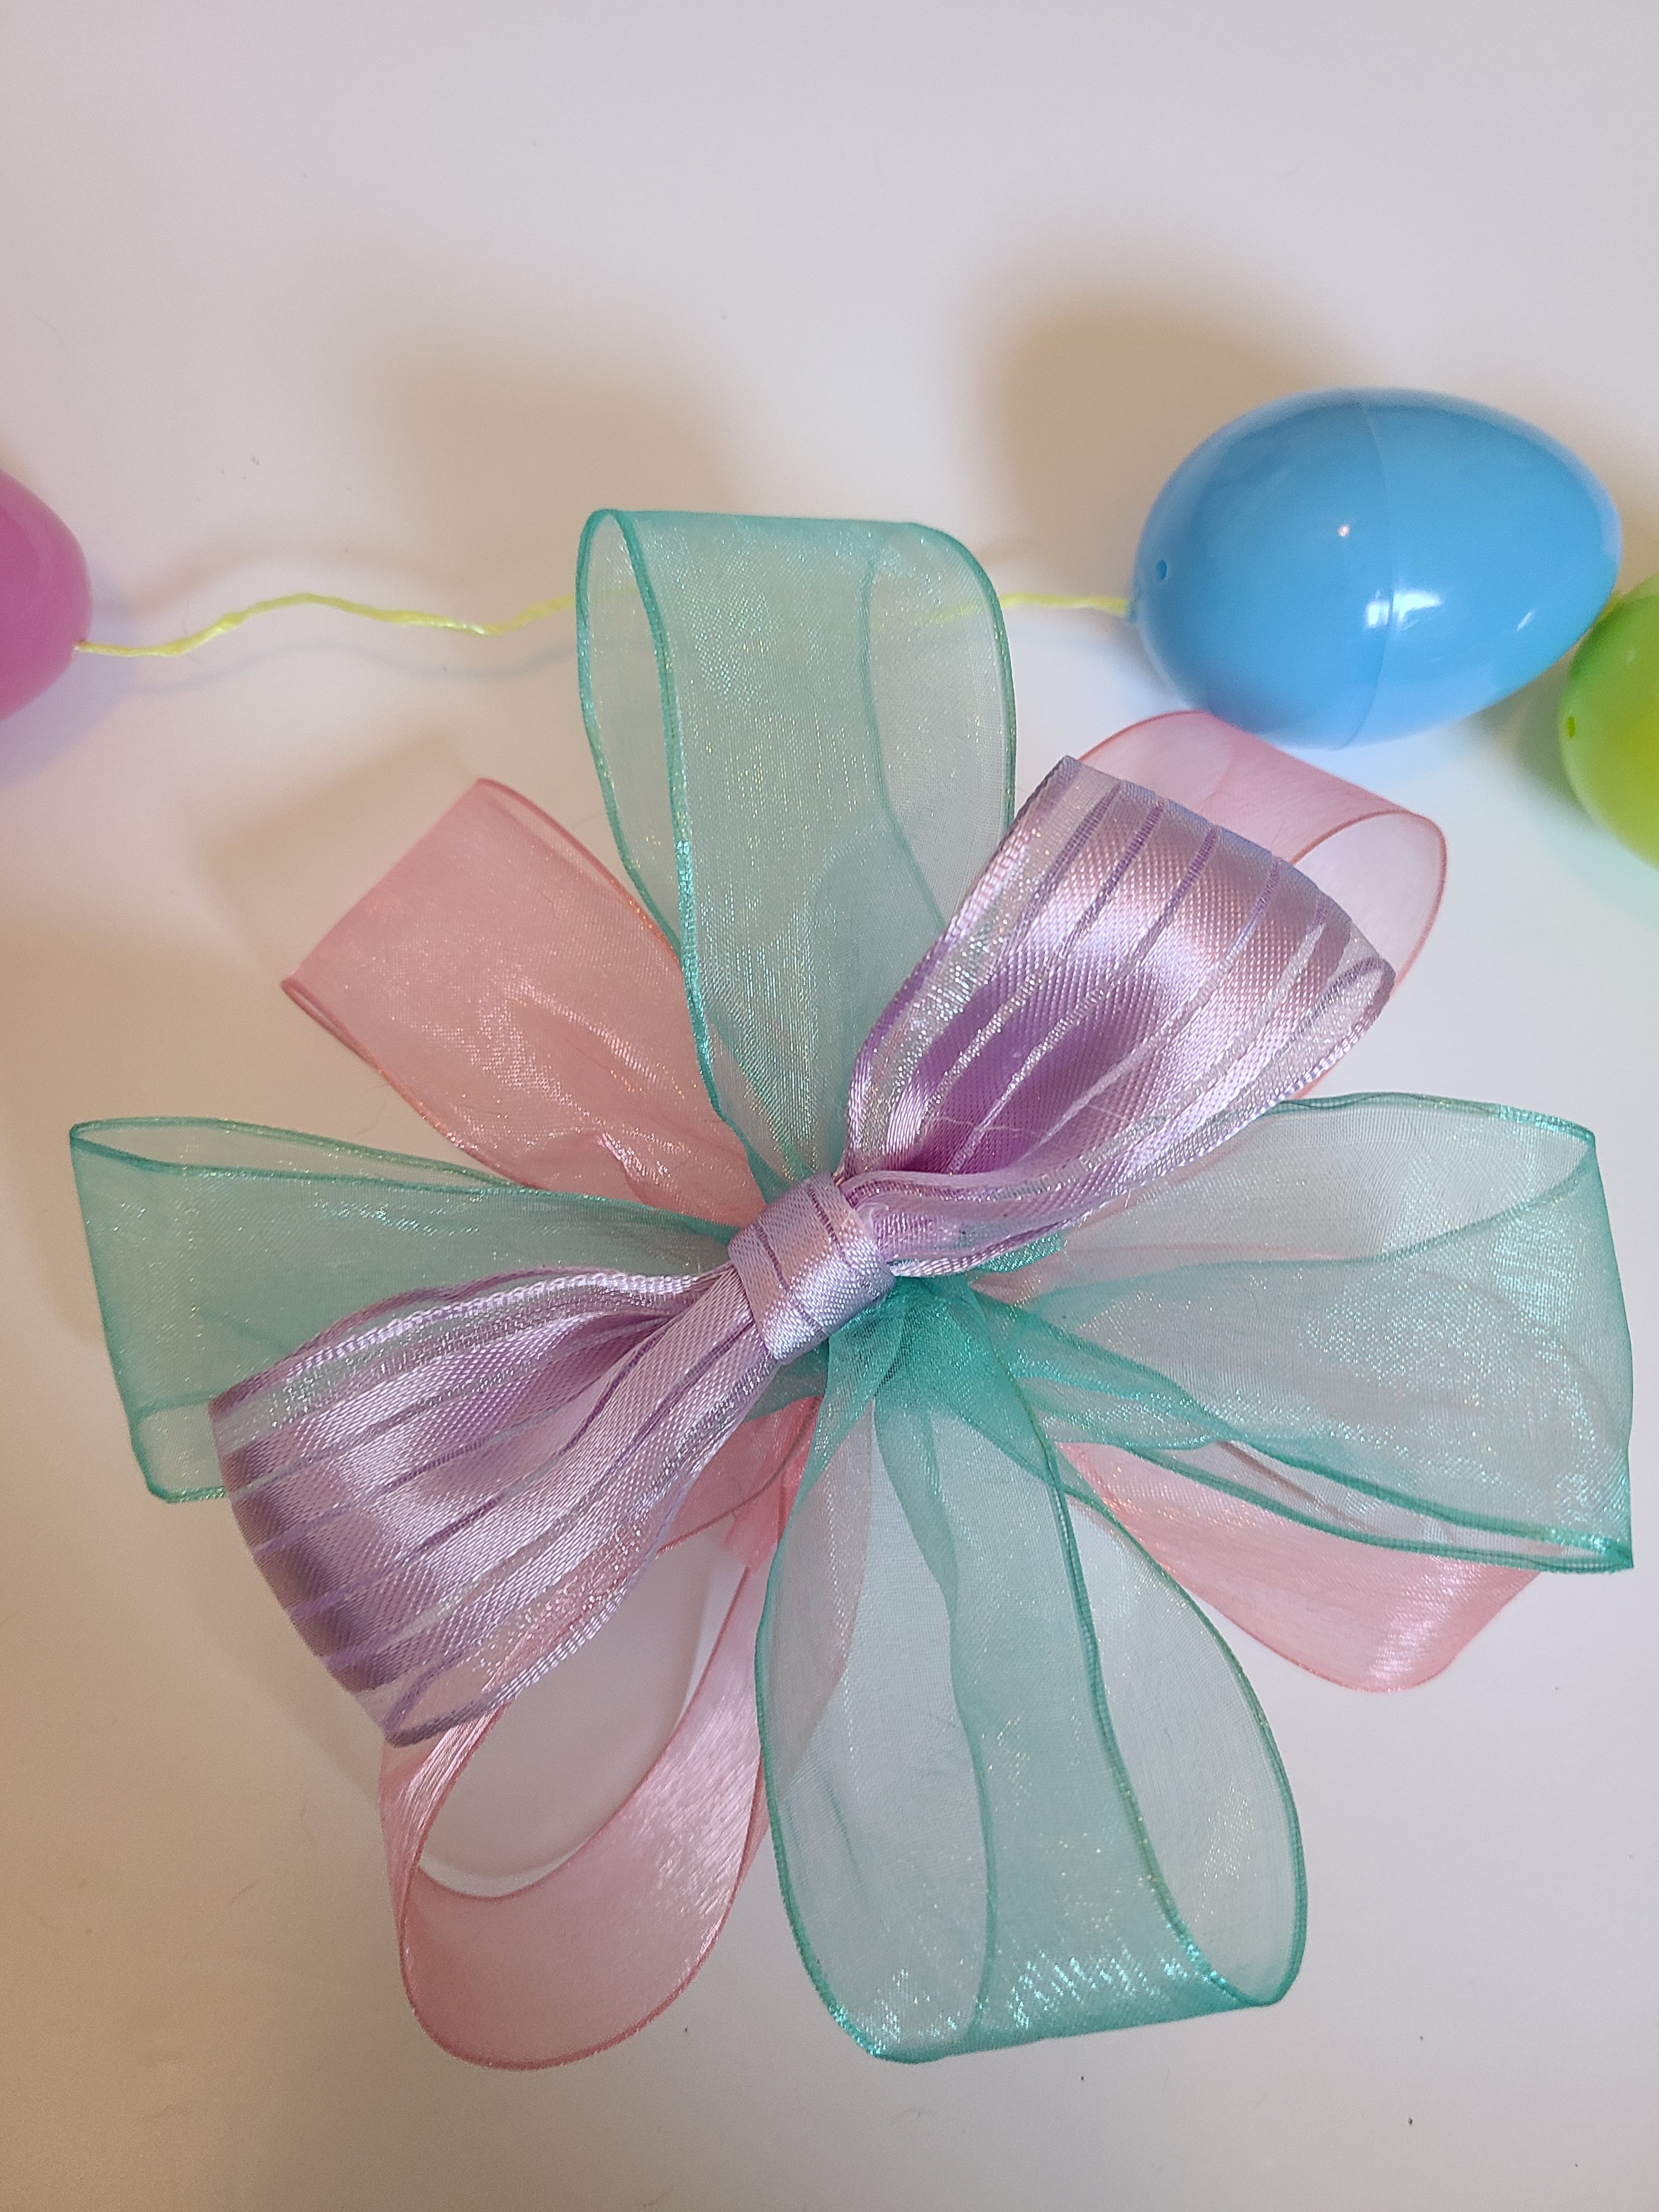 Bow with ten loops made up of 1.5" lavender, pink, and aqua ribbon.